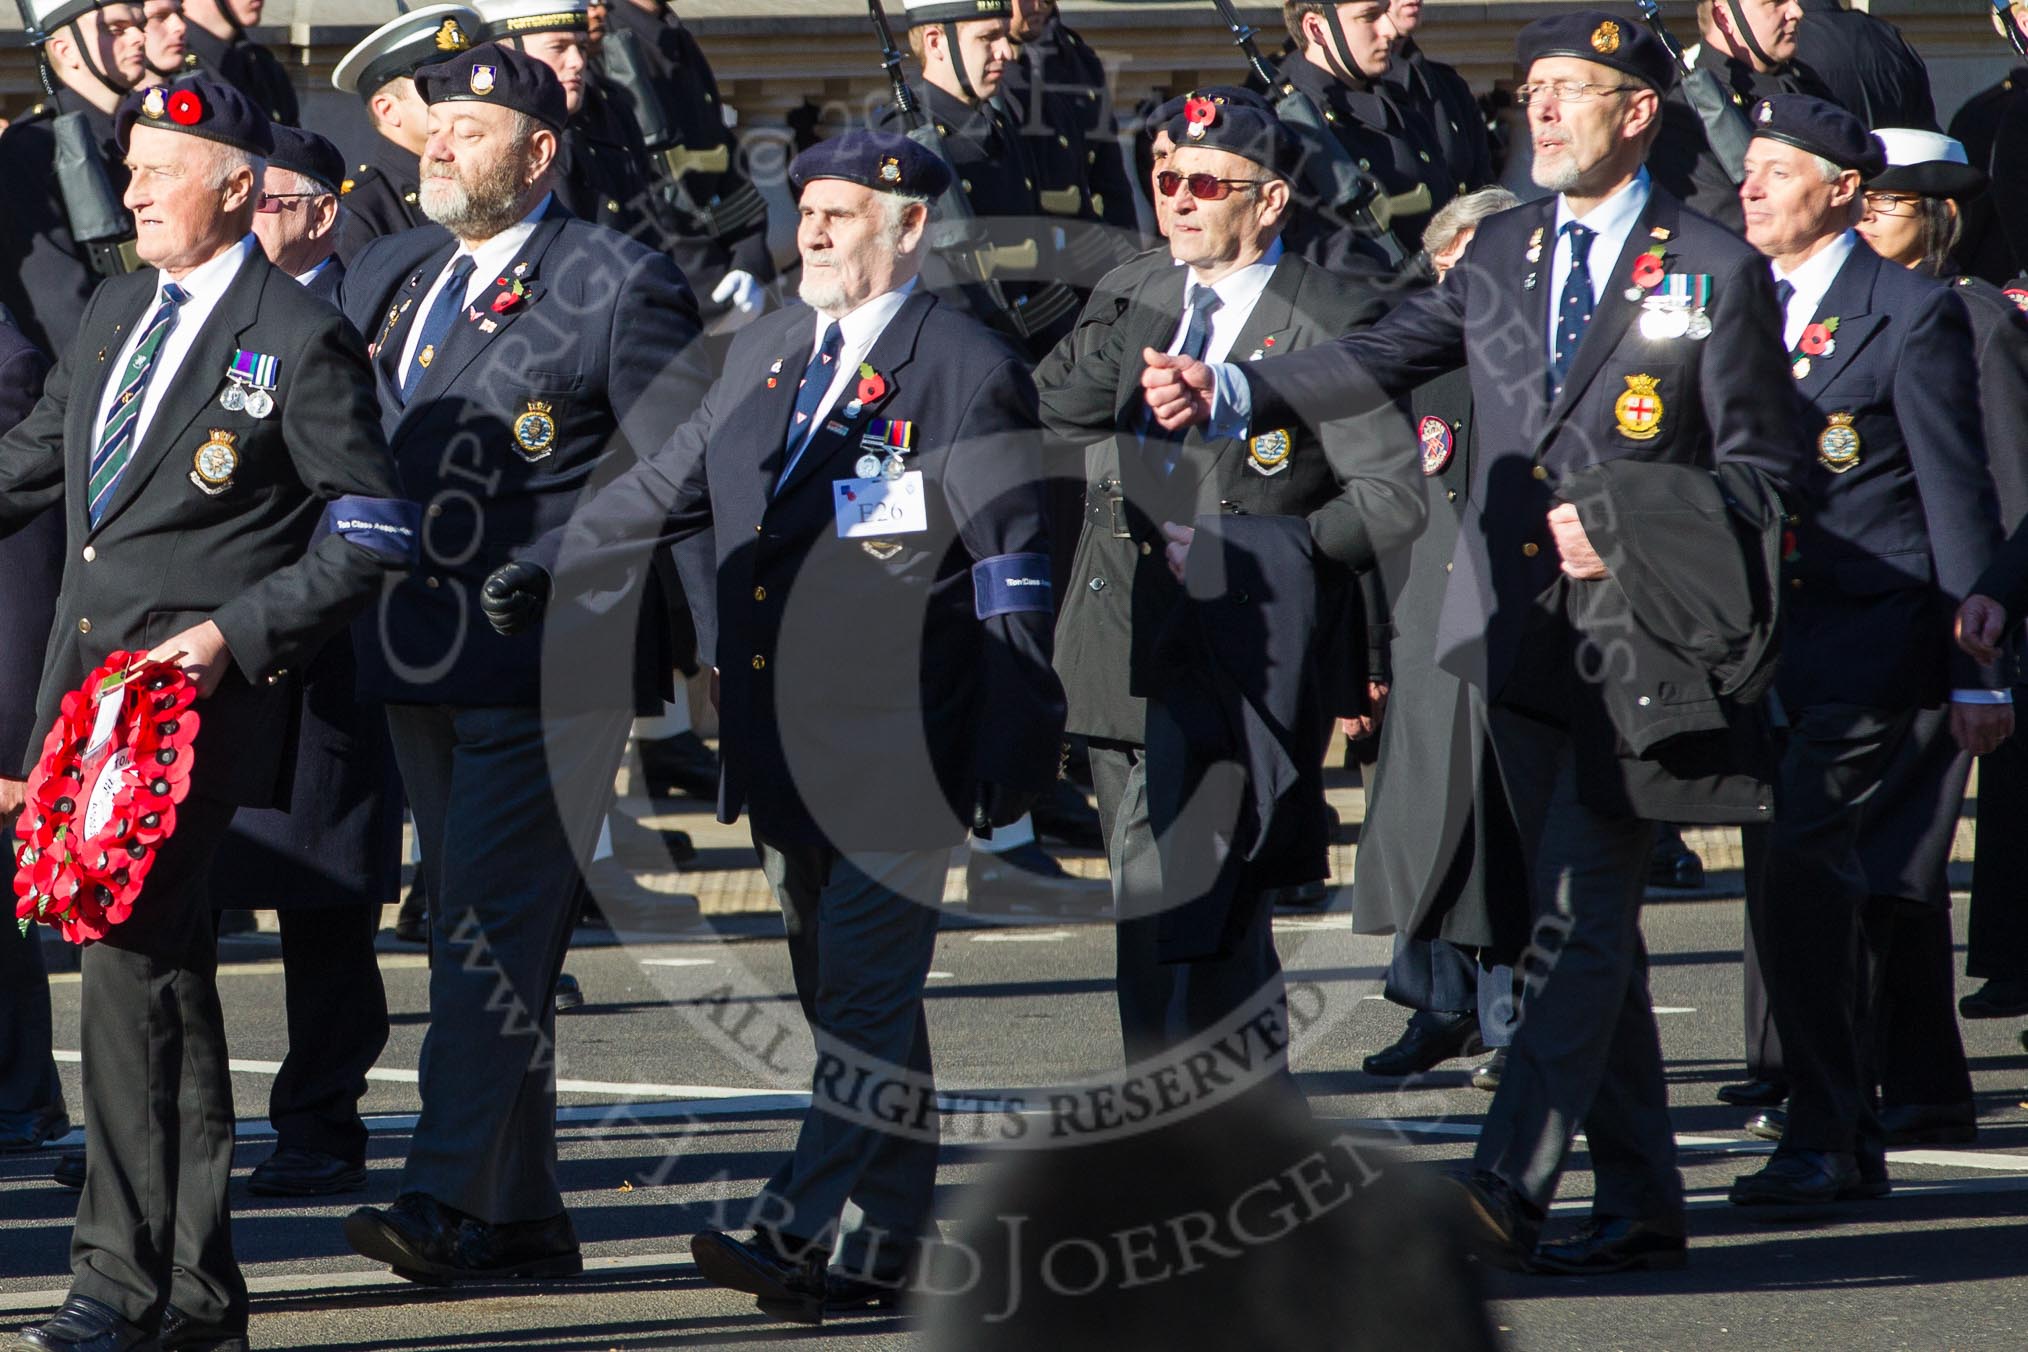 Remembrance Sunday 2012 Cenotaph March Past: Group E26 - Ton Class Association..
Whitehall, Cenotaph,
London SW1,

United Kingdom,
on 11 November 2012 at 11:41, image #185